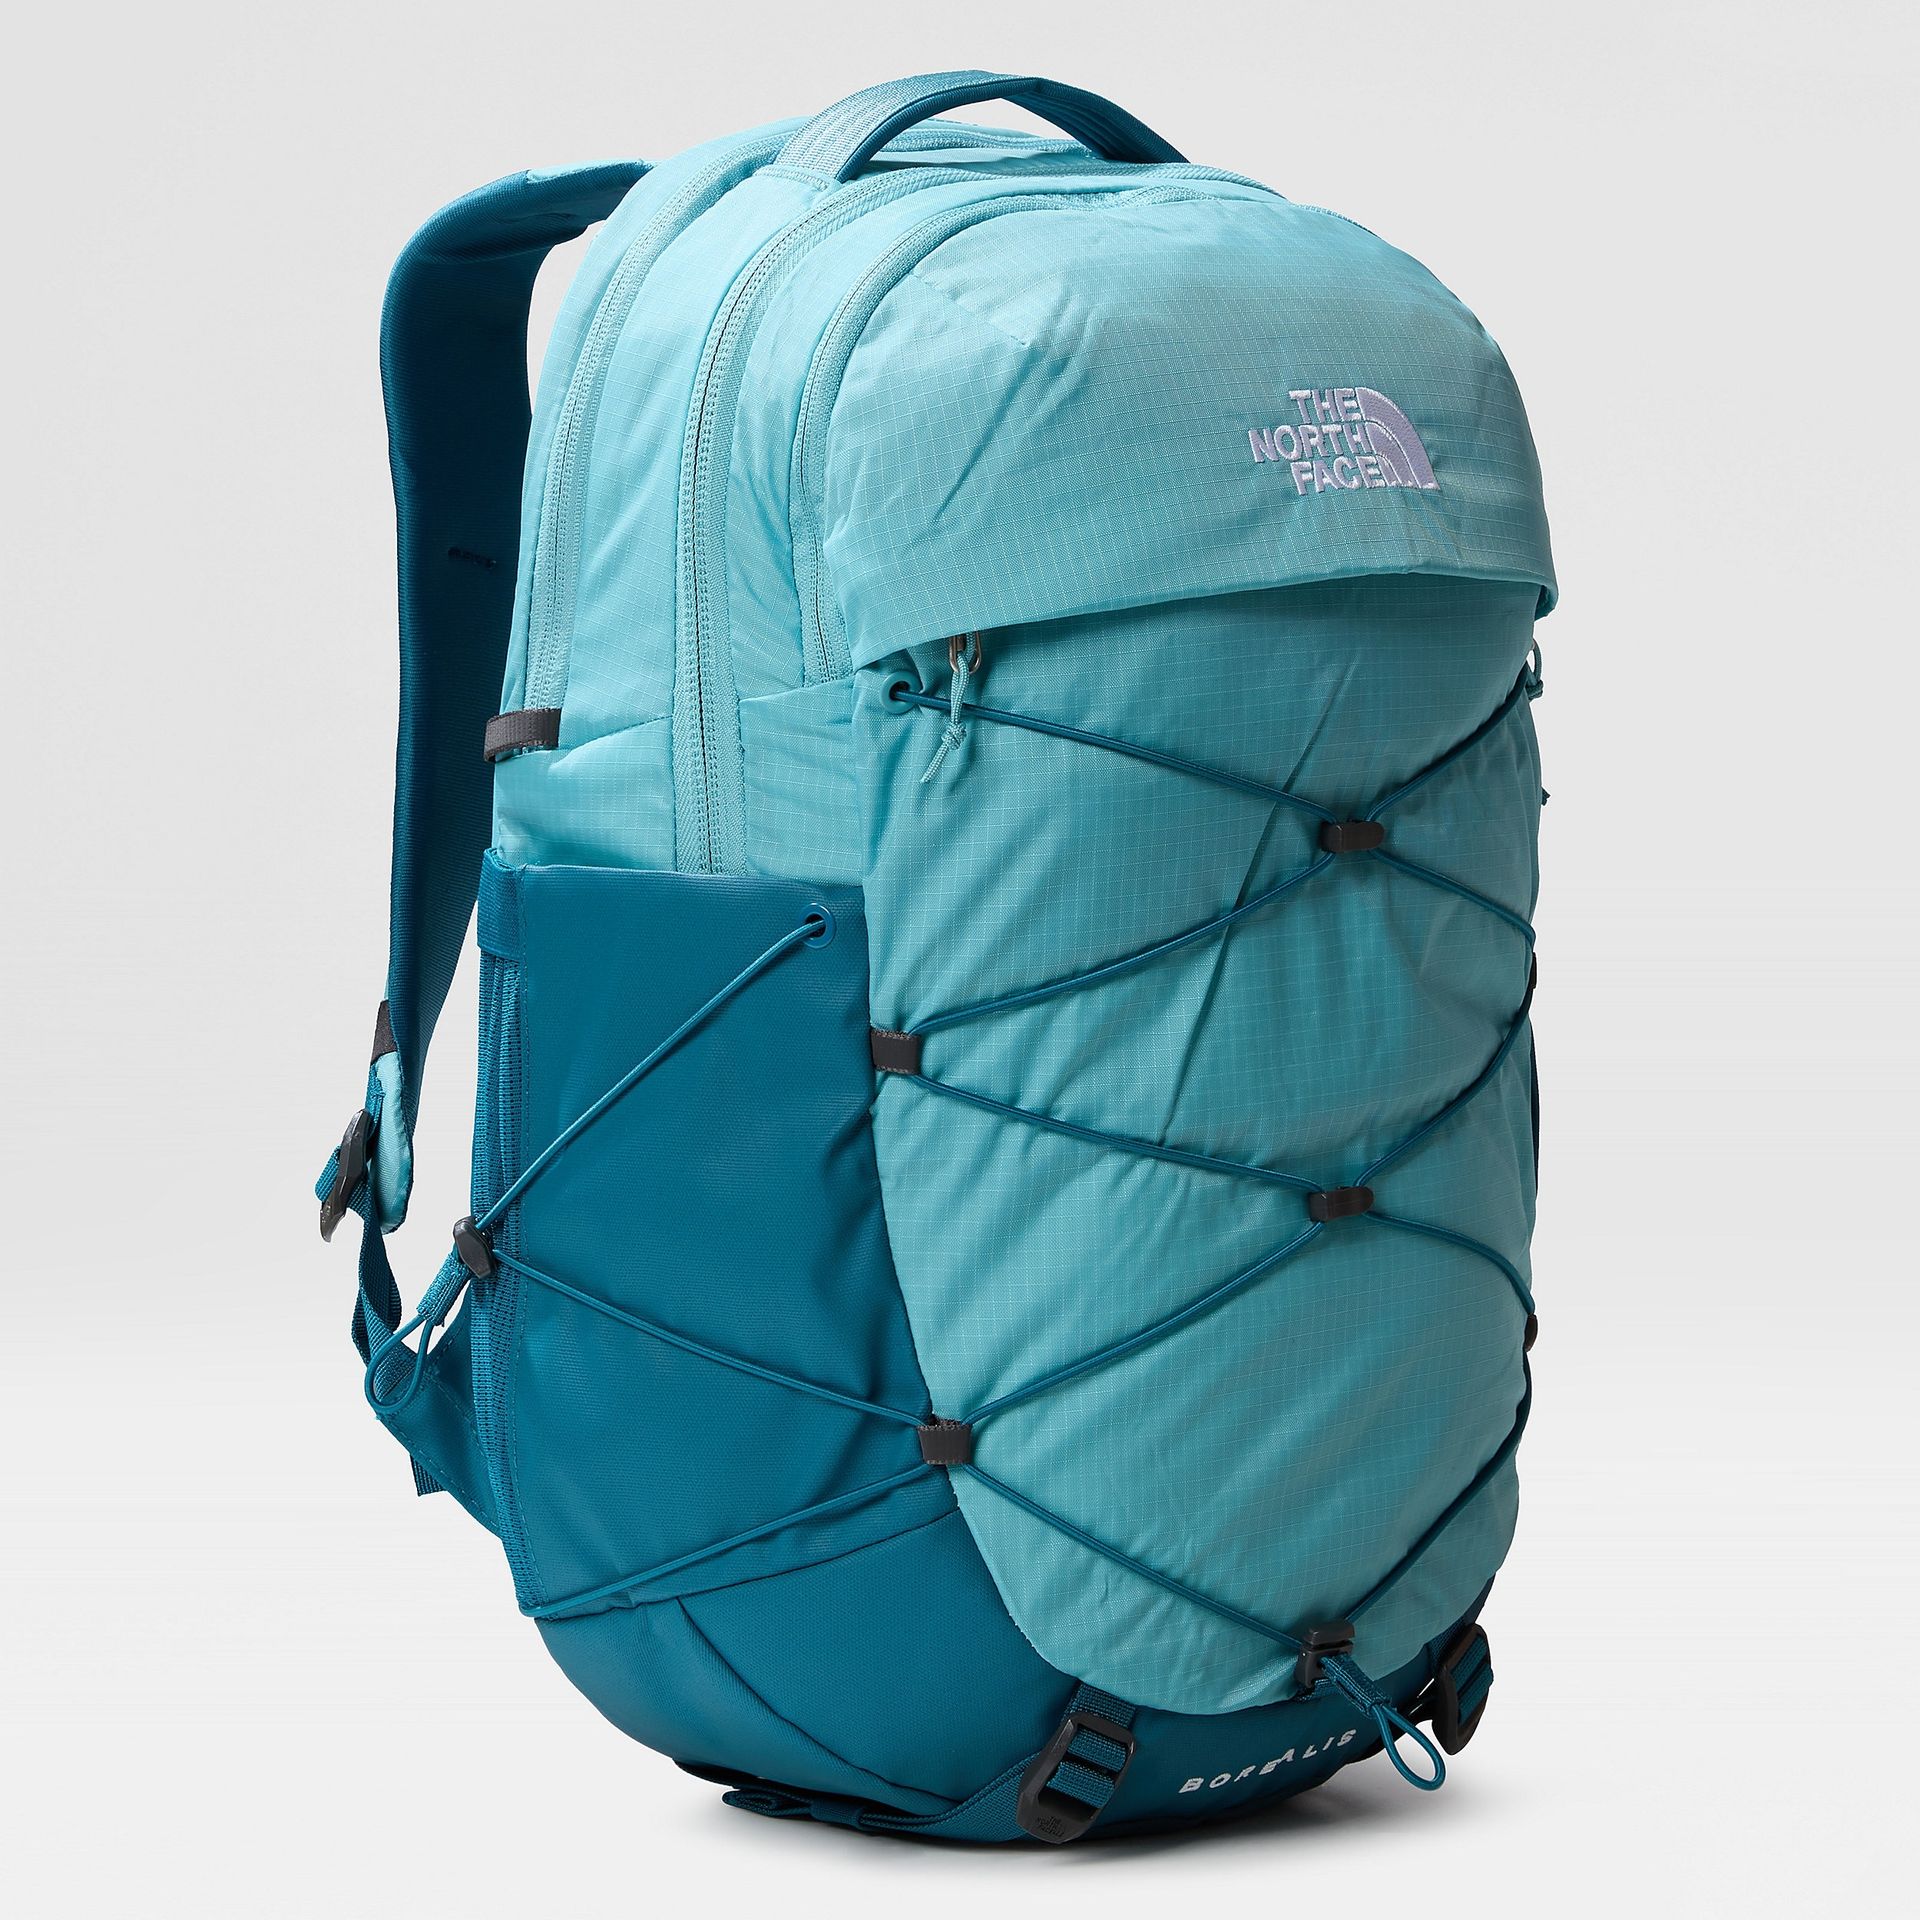 Damski plecak turystyczny The North Face Borealis reef waters/blue coral - ONE SIZE